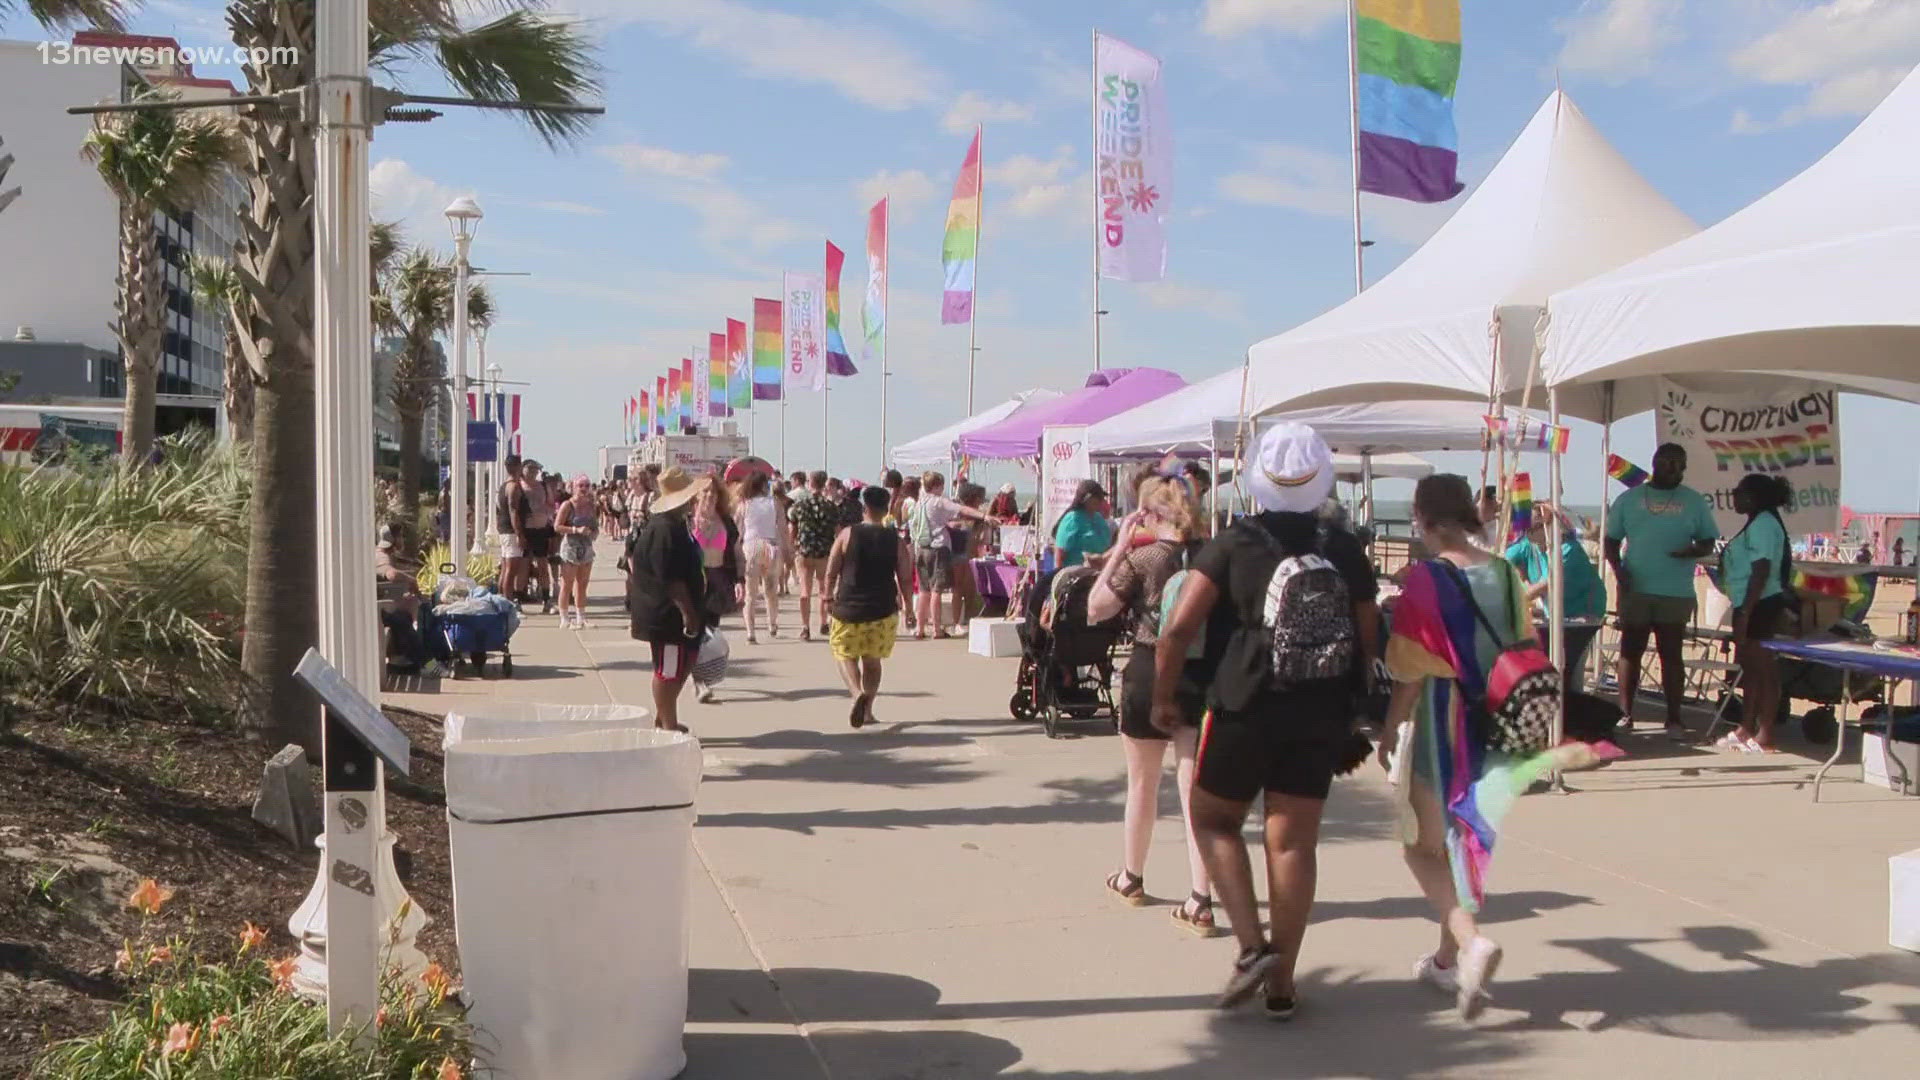 Pride at the Beach organizers tell me they anticipate 5,000 people to attend today.